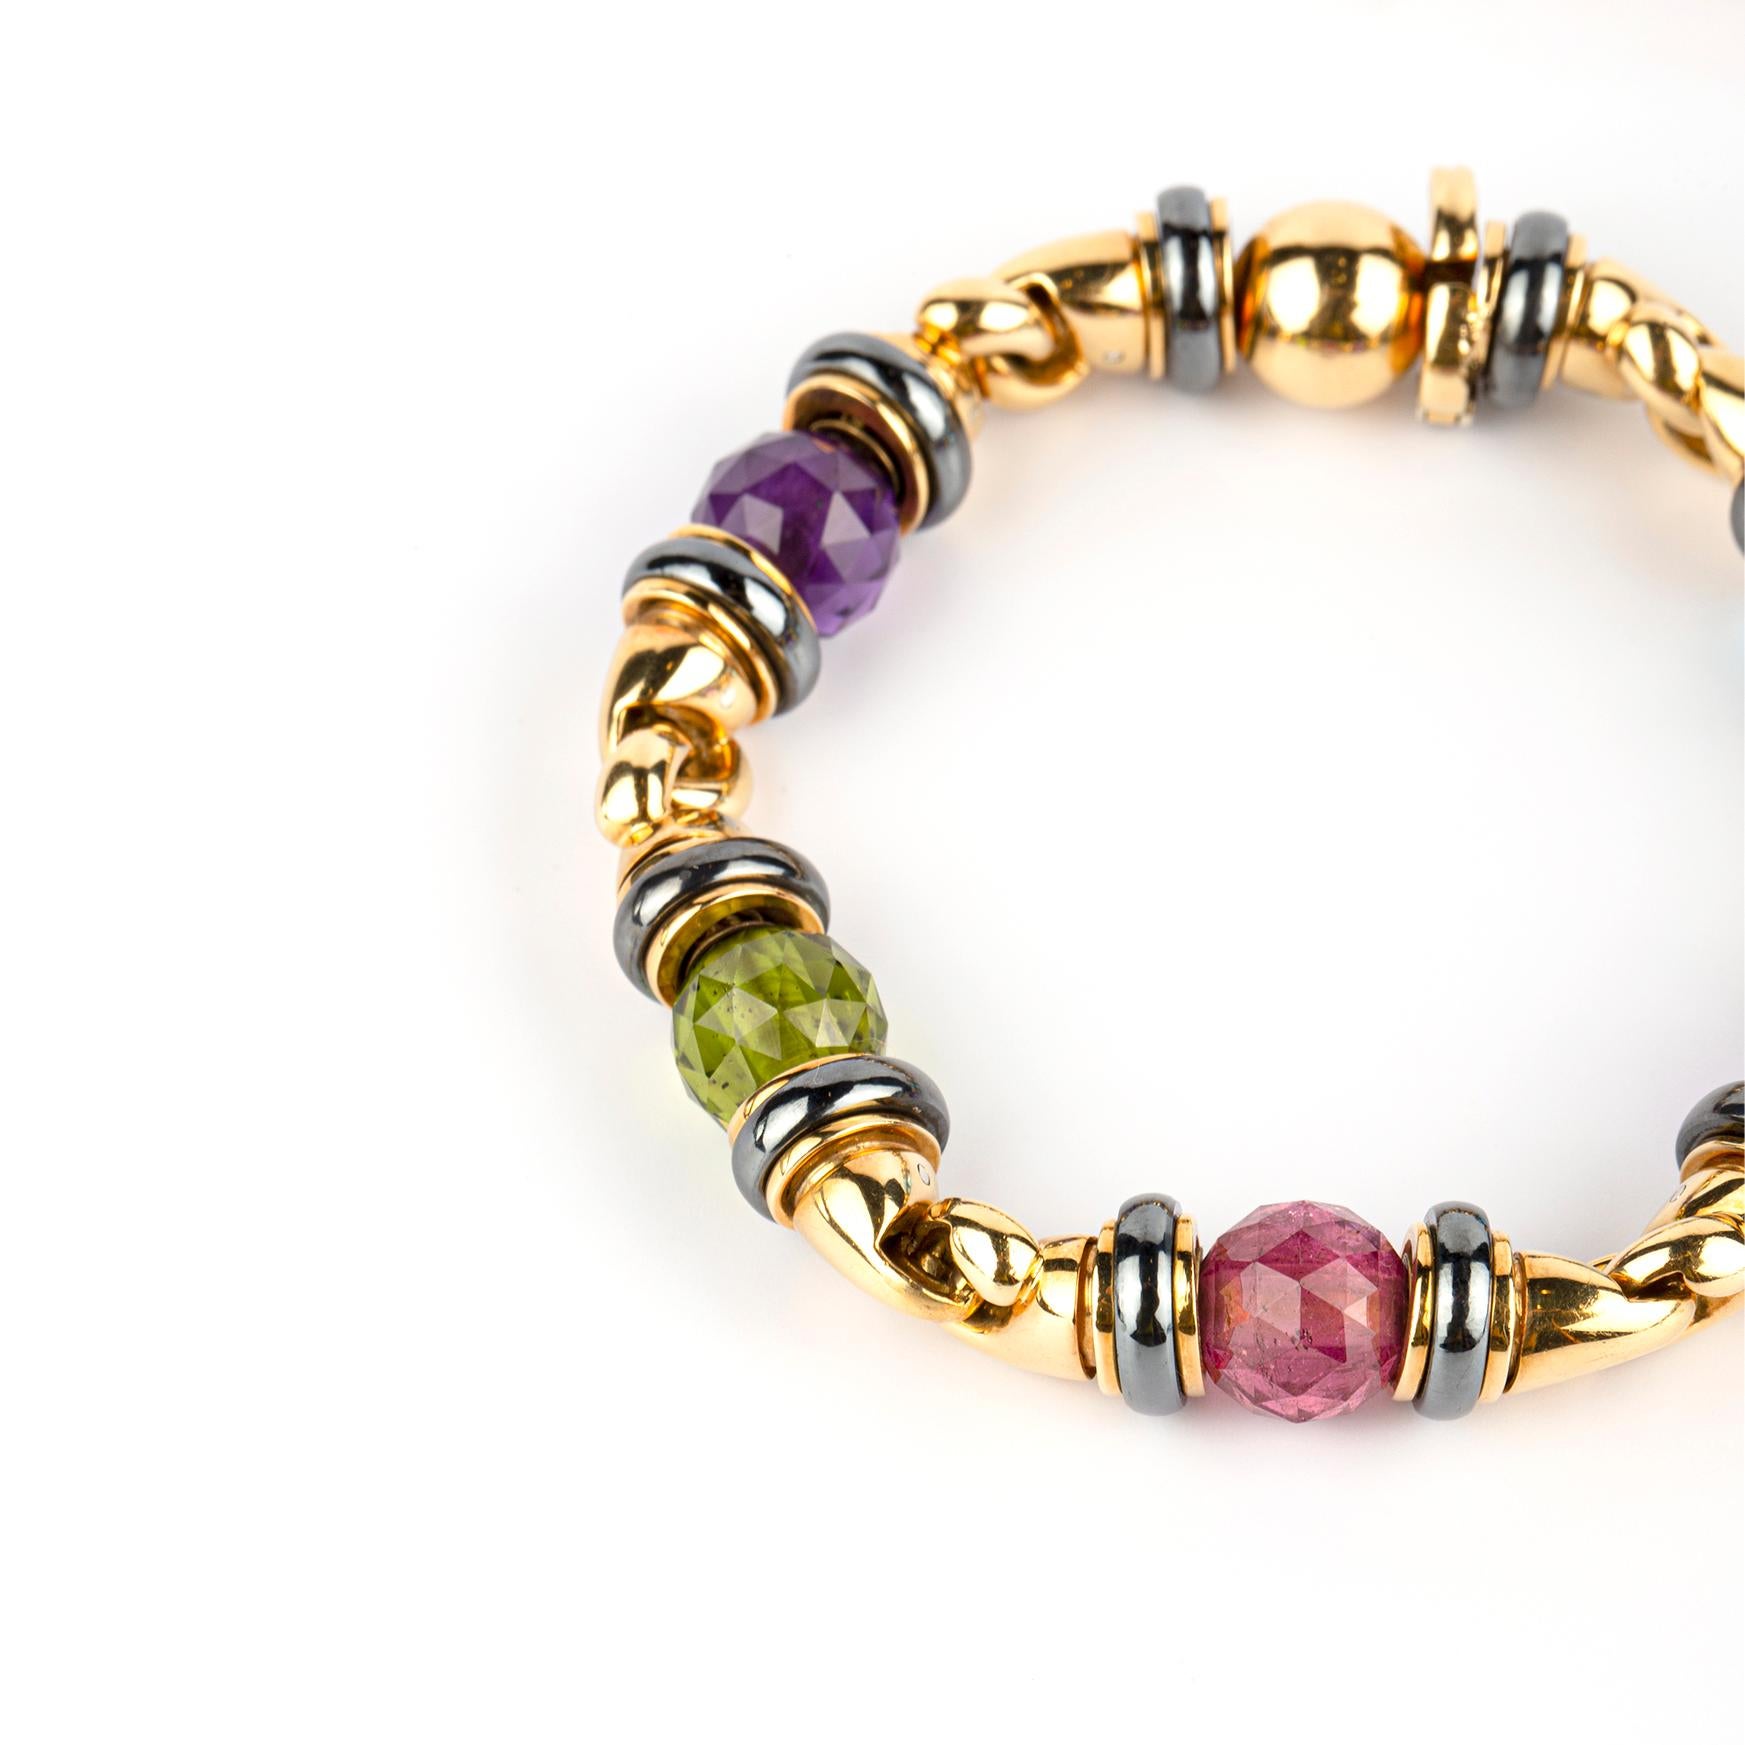 Bulgari 'Gancio' Gold and Multi-Gem Bracelet In Excellent Condition For Sale In New York, NY